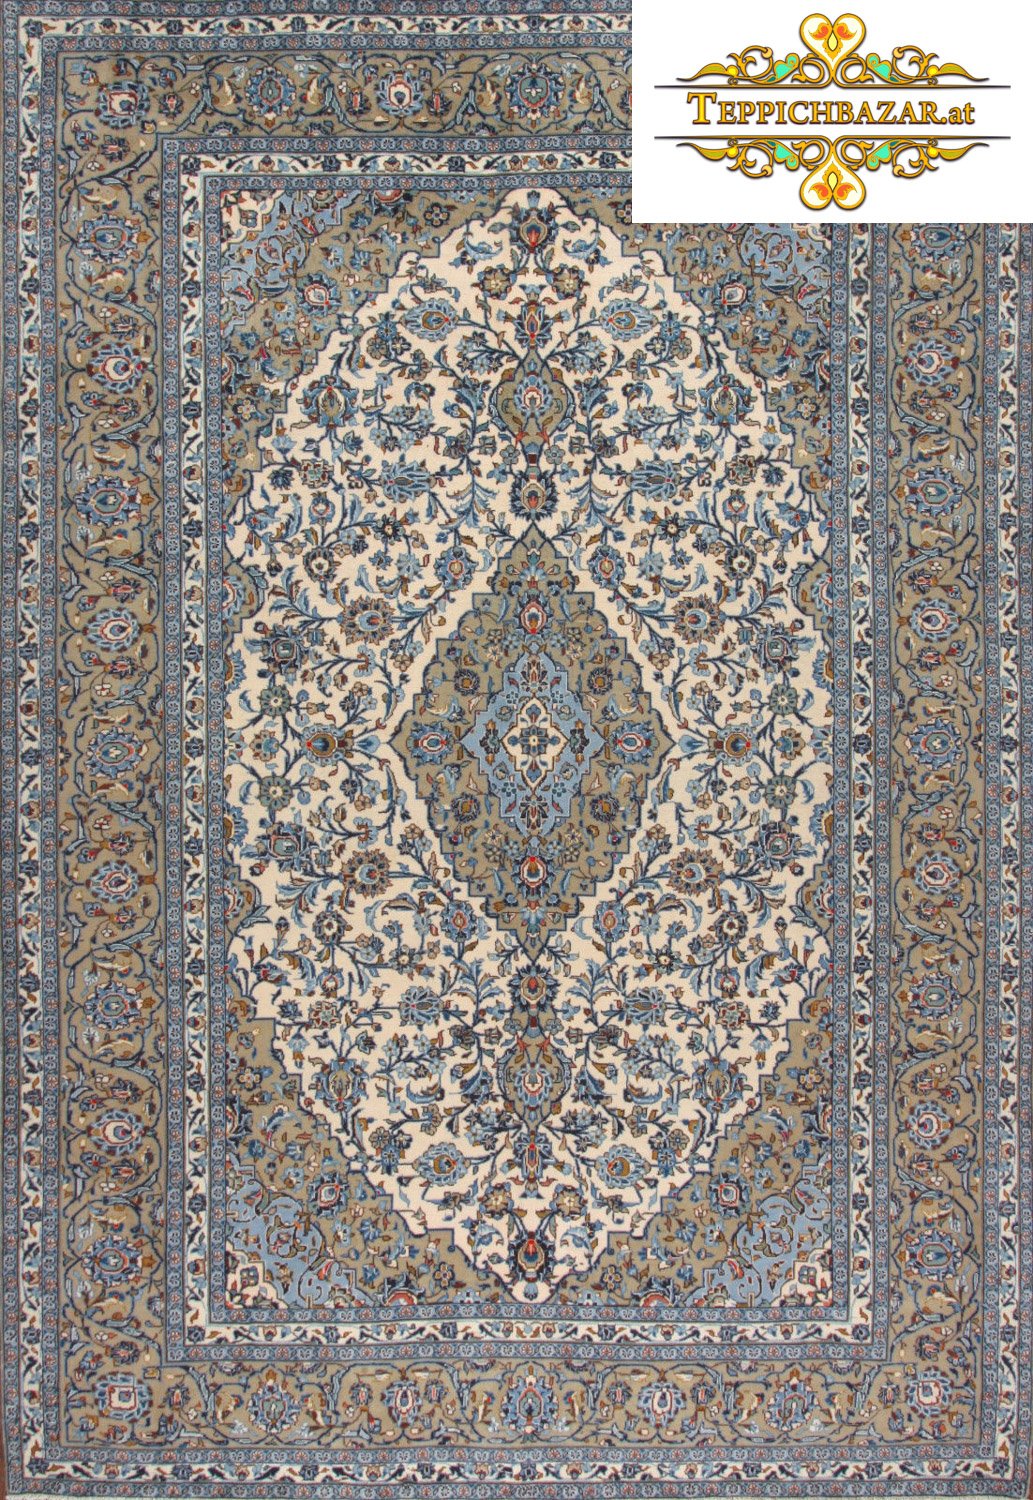 (#H1096) APPROX. 360X250CM HANDKNOTTED ISFAHAN (ISAFAHAN), KASHAN (KASHAN) PERSIAN CARPET PERSIAN RUG,ISFAHAN,ISAFAHAN,KASCHAN,KASHAN,WOOL,ORIENTAL RUG,CARPET BAZAR,CARP,RUGS,PATTERNS,ZIEGLER,ORIENTAL CARPETS TYPE: PERSIAN RUG WITH SIGNATURE ORIGIN: ISFA HAN (ISAFAHAN), KASCHAN (KASHAN) FLOOR: 100% WOOL WITH NO ADDITIVE WARP: 100% COTTON SIZE: 360X250CM KNOT COUNT: APPROX. 200.000 KNOTS PER M² CONDITION: VERY GOOD, WITH MINIMAL PATINA PERSIAN CARPET ORIENTAL CARPET